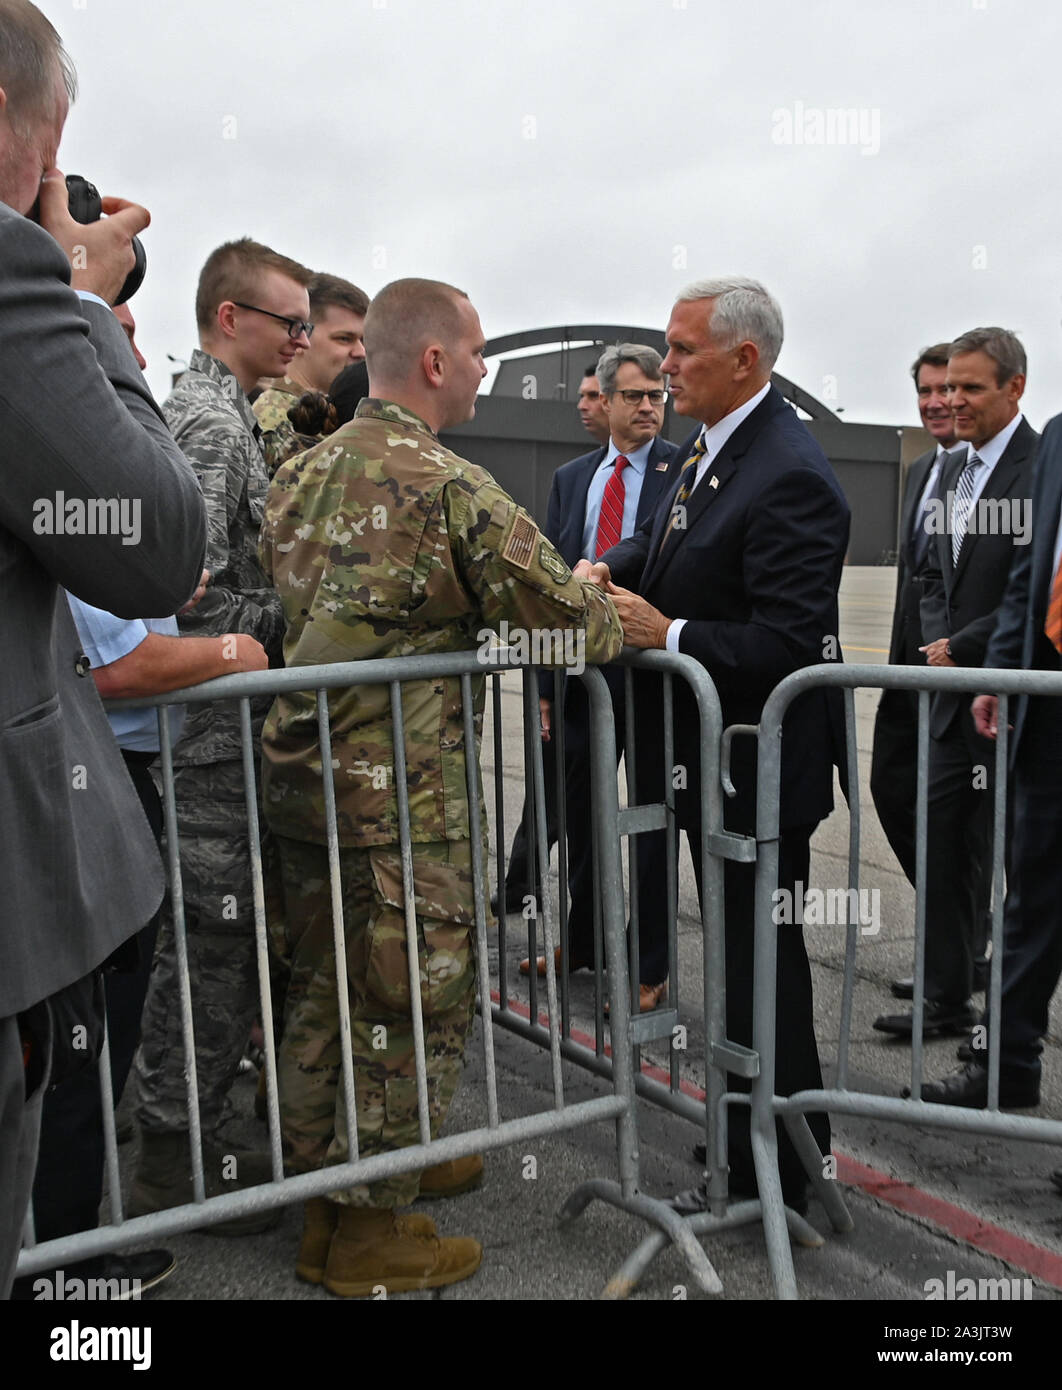 Vice President Mike Pence shakes hands with an Airman Oct. 7, 2019 at Berry Field Air National Guard Base, Nashville, Tenn. Pence briefly visited Berry Field before leaving for several events in the greater Nashville area. (U.S. Air National Guard photo by Staff Sgt. Anthony Agosti) Stock Photo